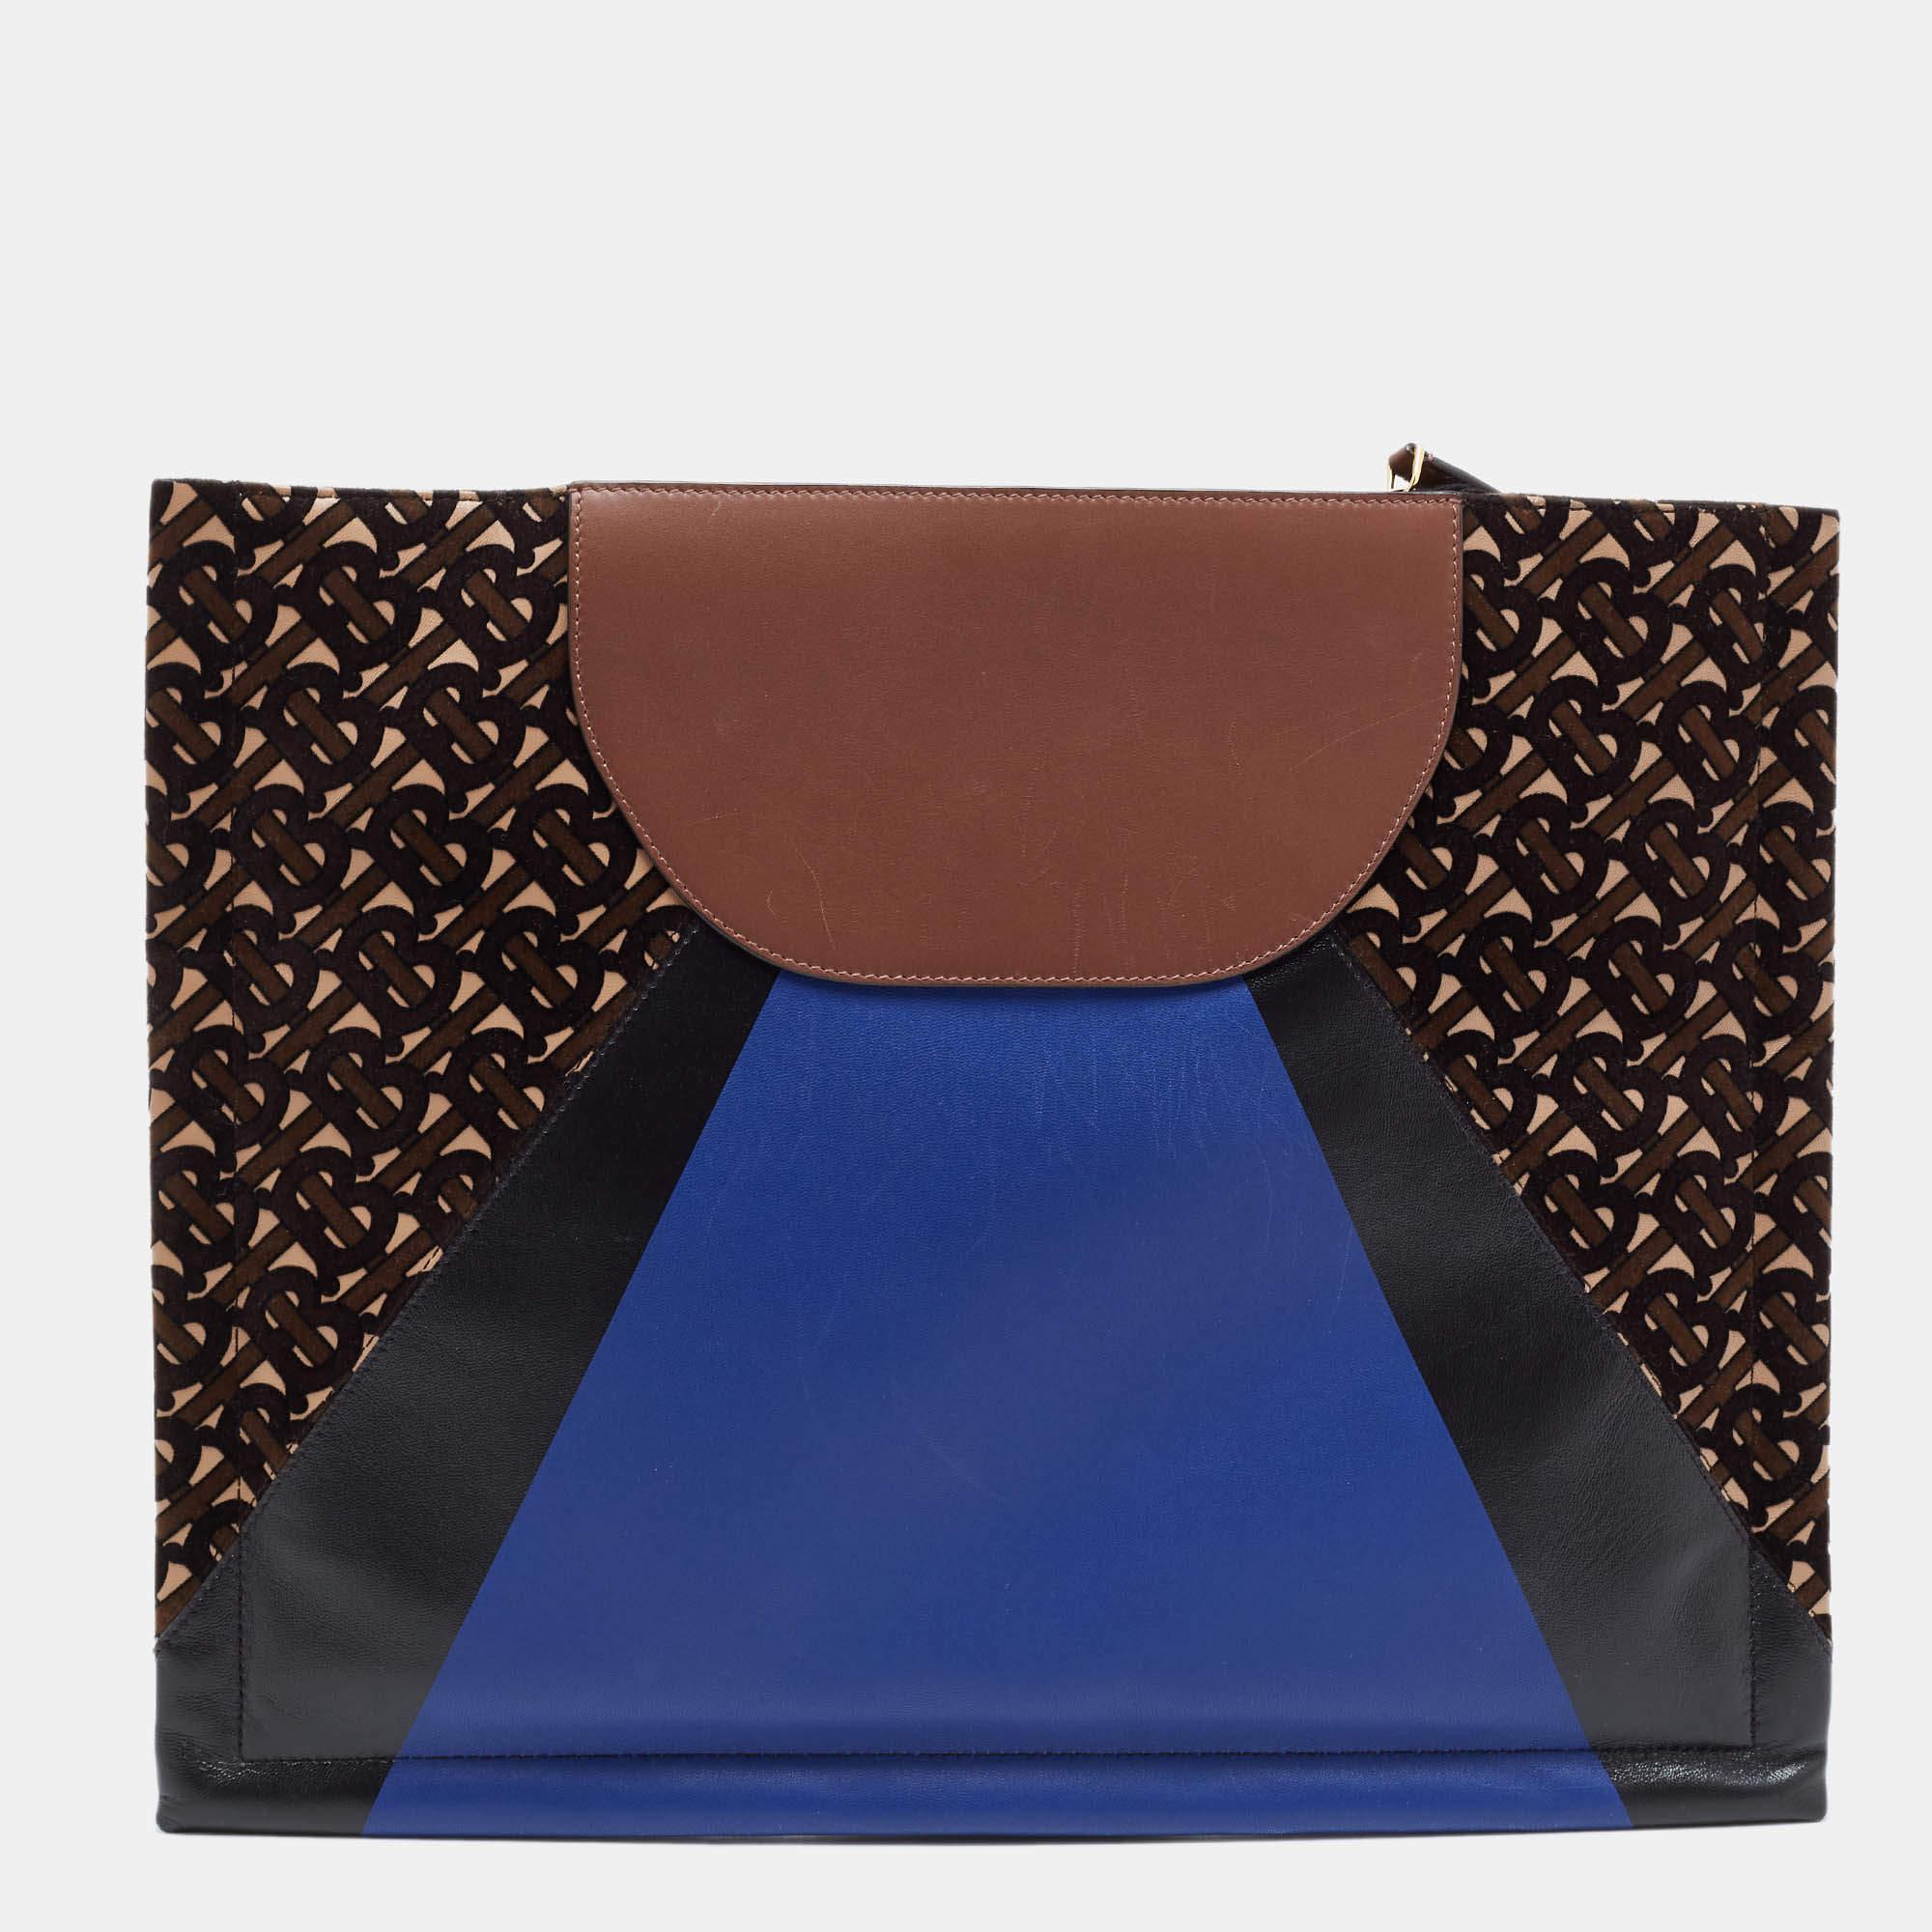 This oversized clutch is just the right accessory to compliment your chic ensemble. It comes crafted in quality material featuring a well-sized interior that can comfortably hold all your little essentials.

Includes: Original Dustbag, Info Booklet,